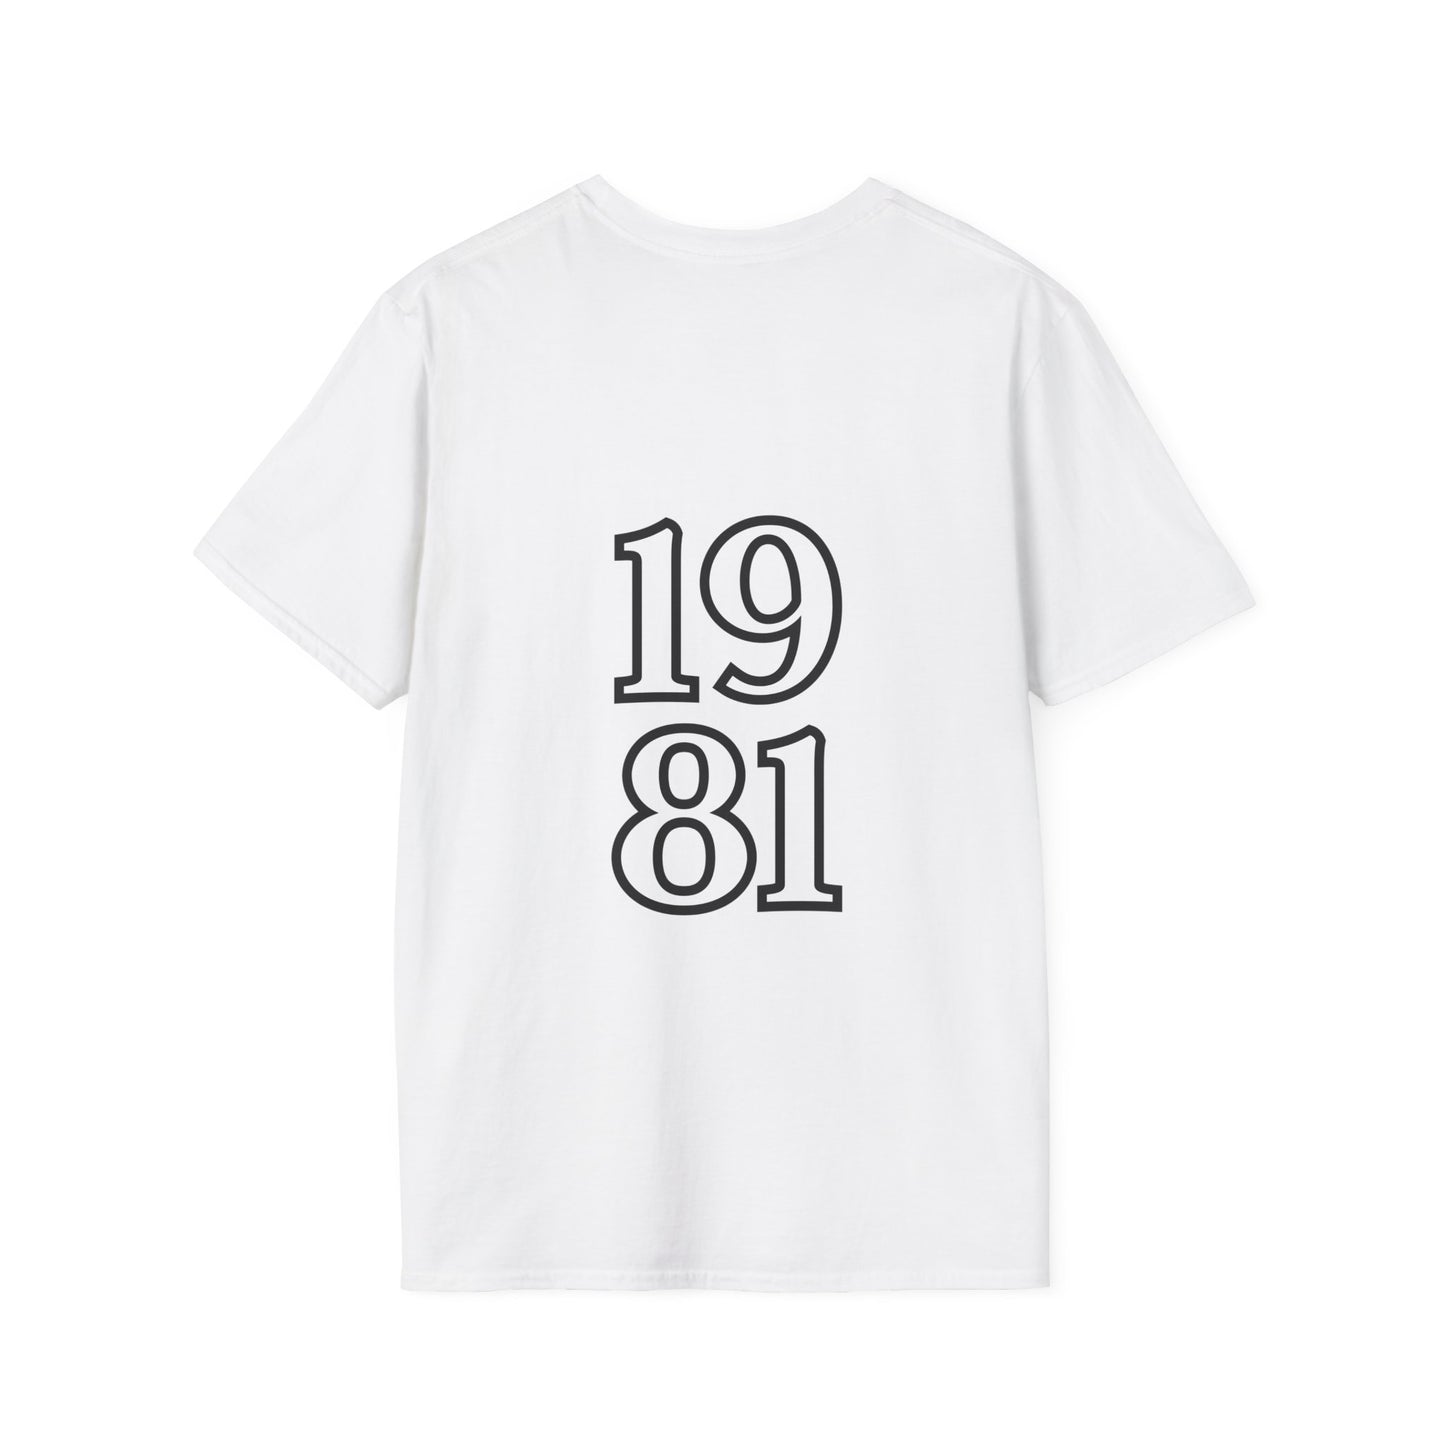 1981 x Years Collection - tee